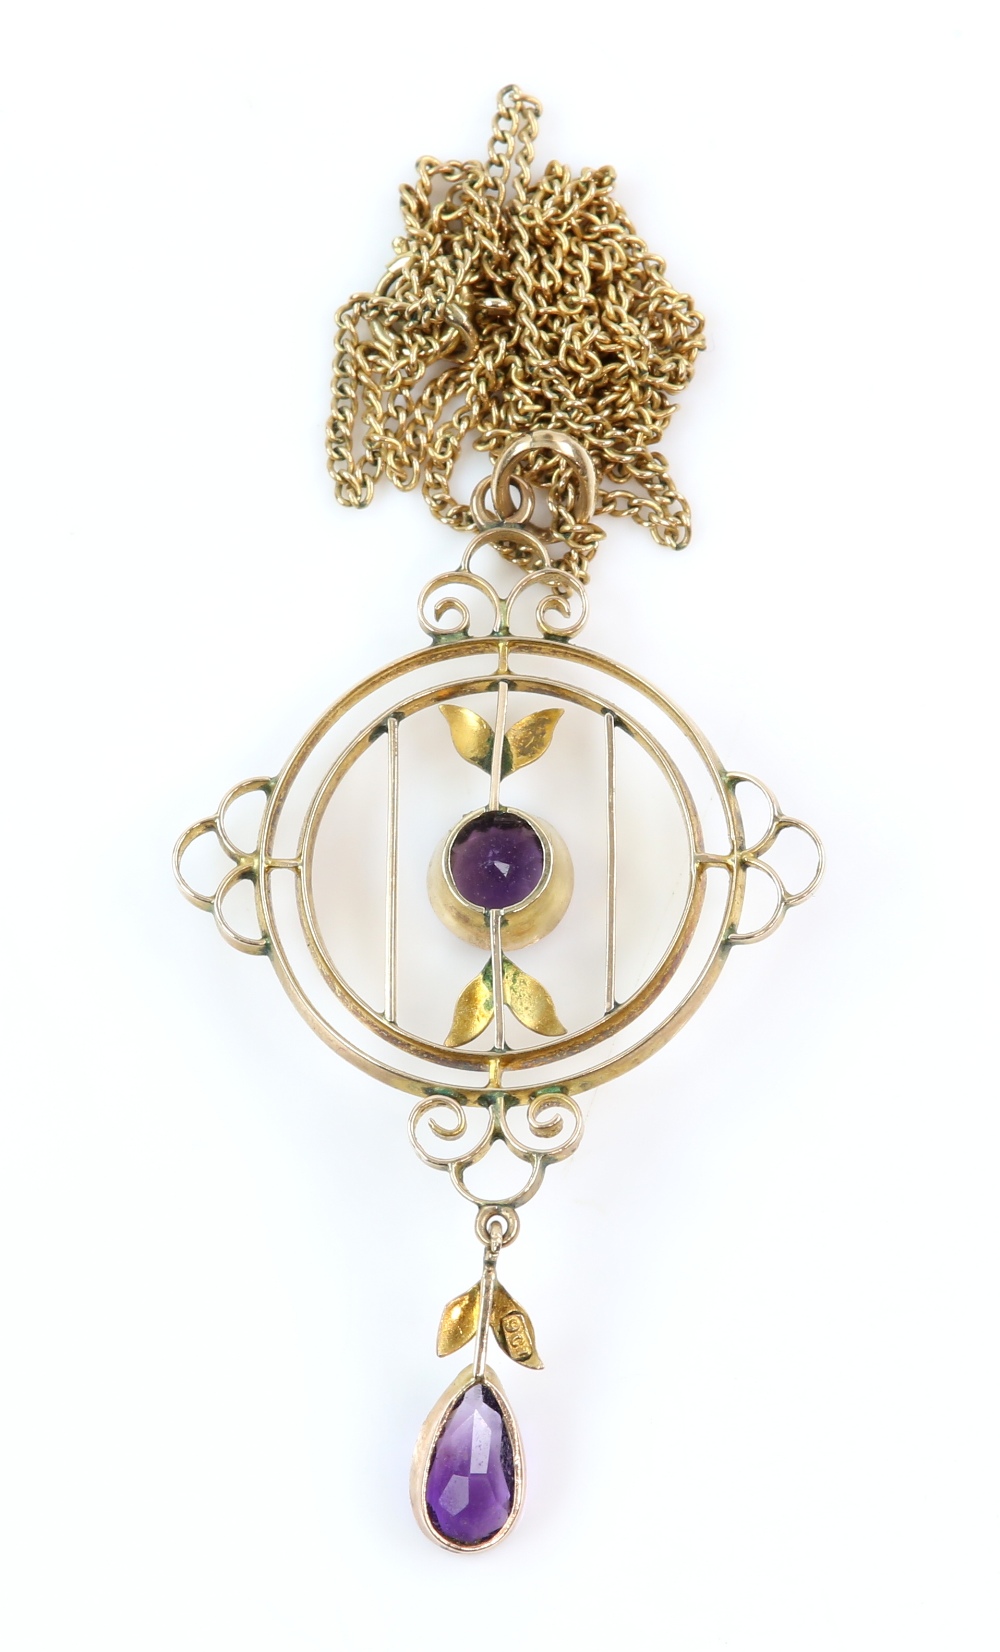 Edwardian amethyst pendant and chain, pendant stamped 9 ct, 5.3 x 2.9cm, curb link chain, testing as - Image 4 of 4